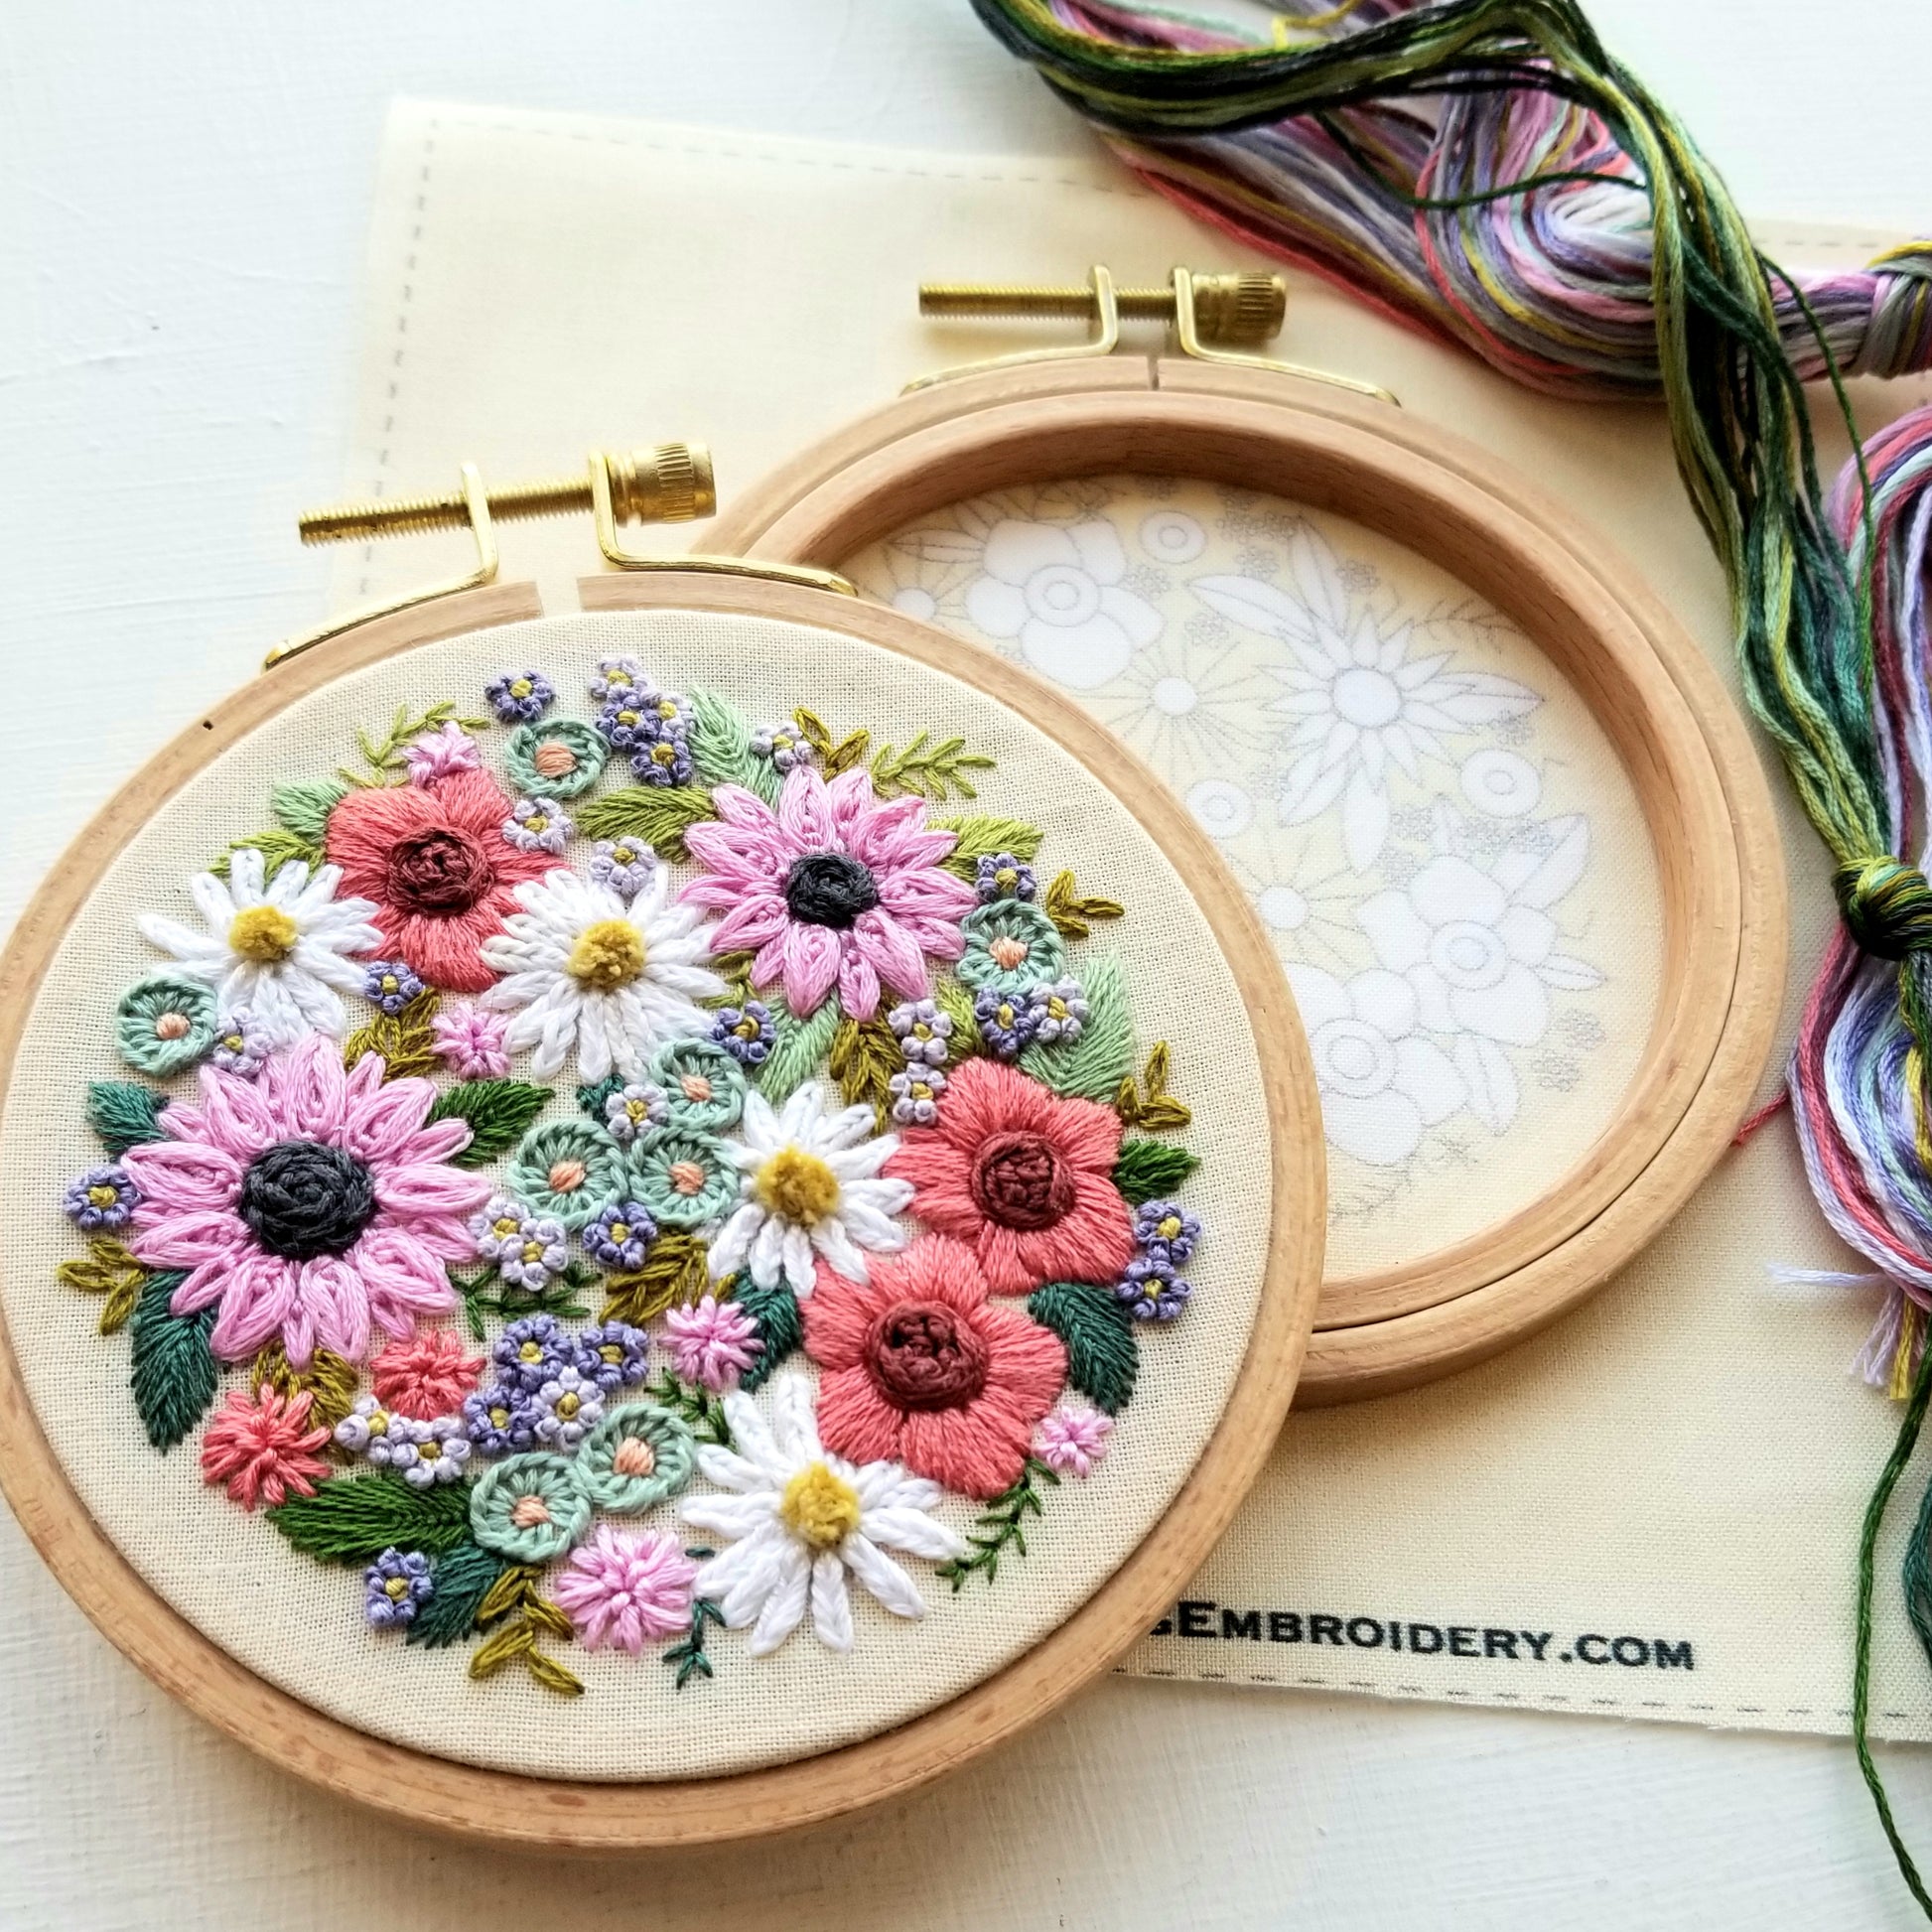  VELLBONG Embroidery Kit with Floral Pattern 4 Sets